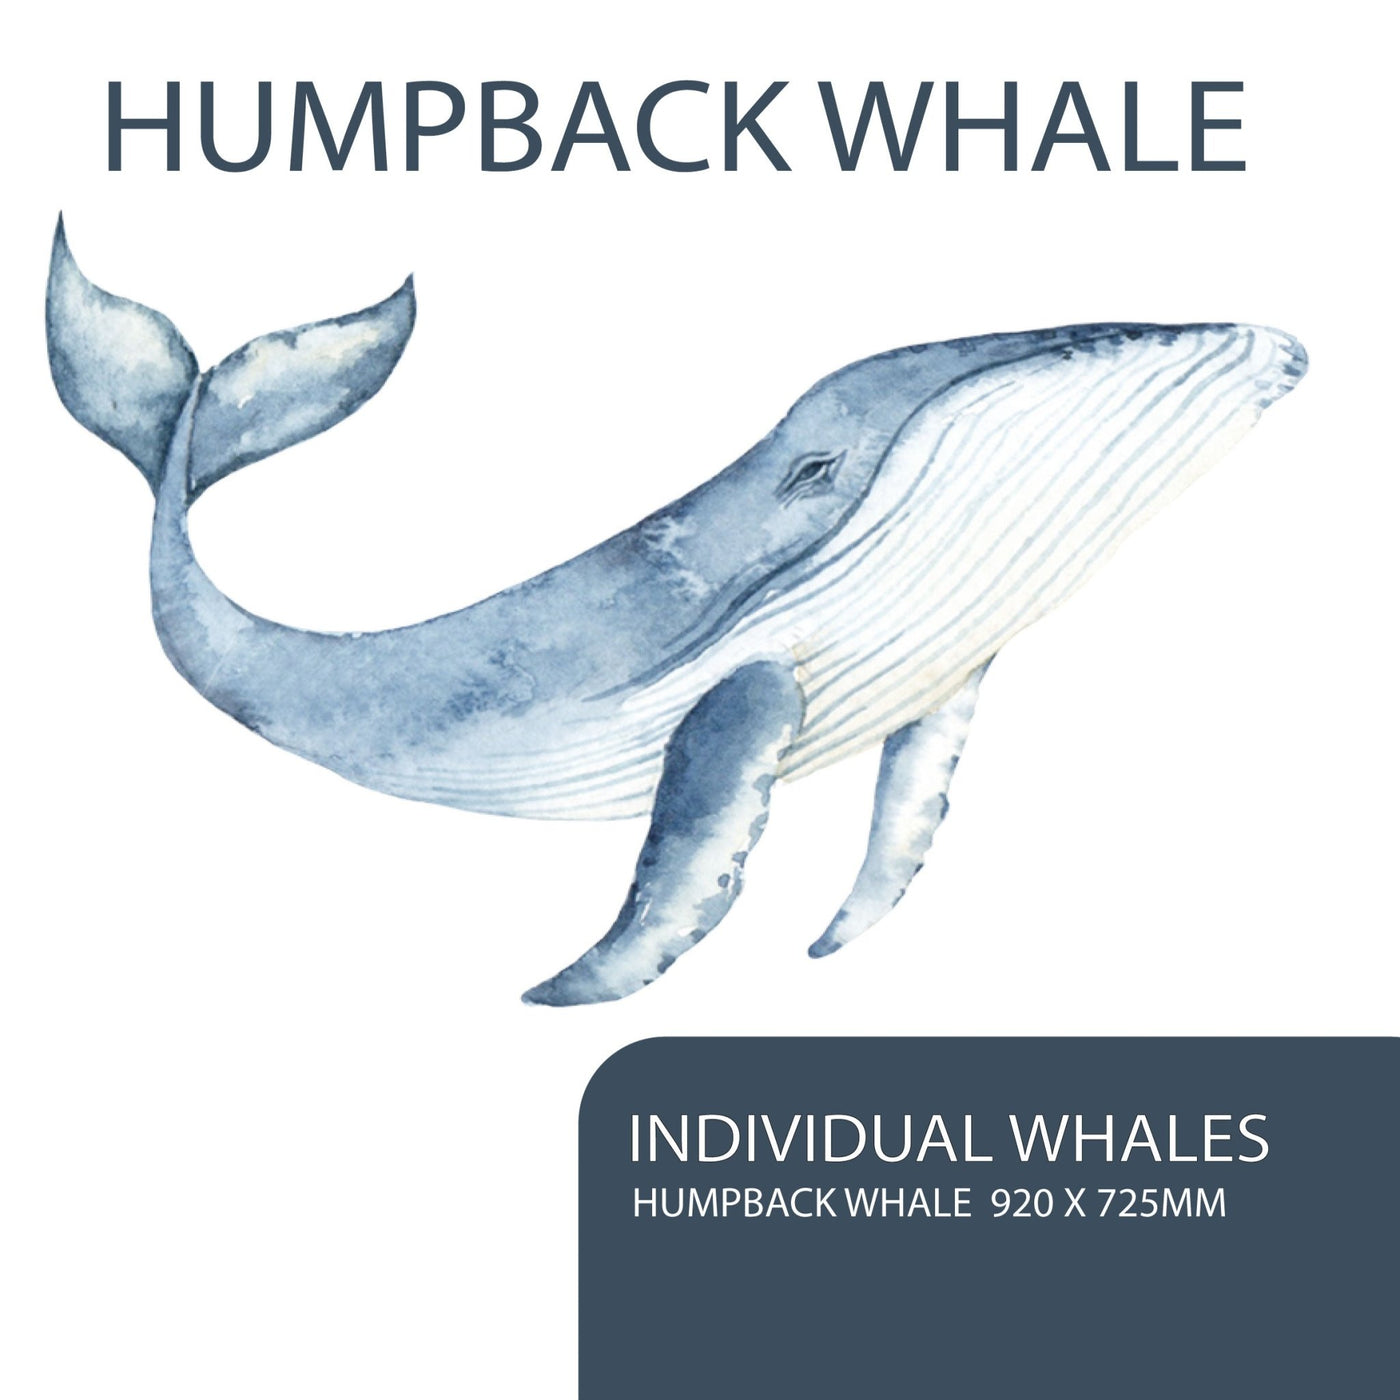 Whales and Bubbles Wall Decals - Jack Harry and Ollie